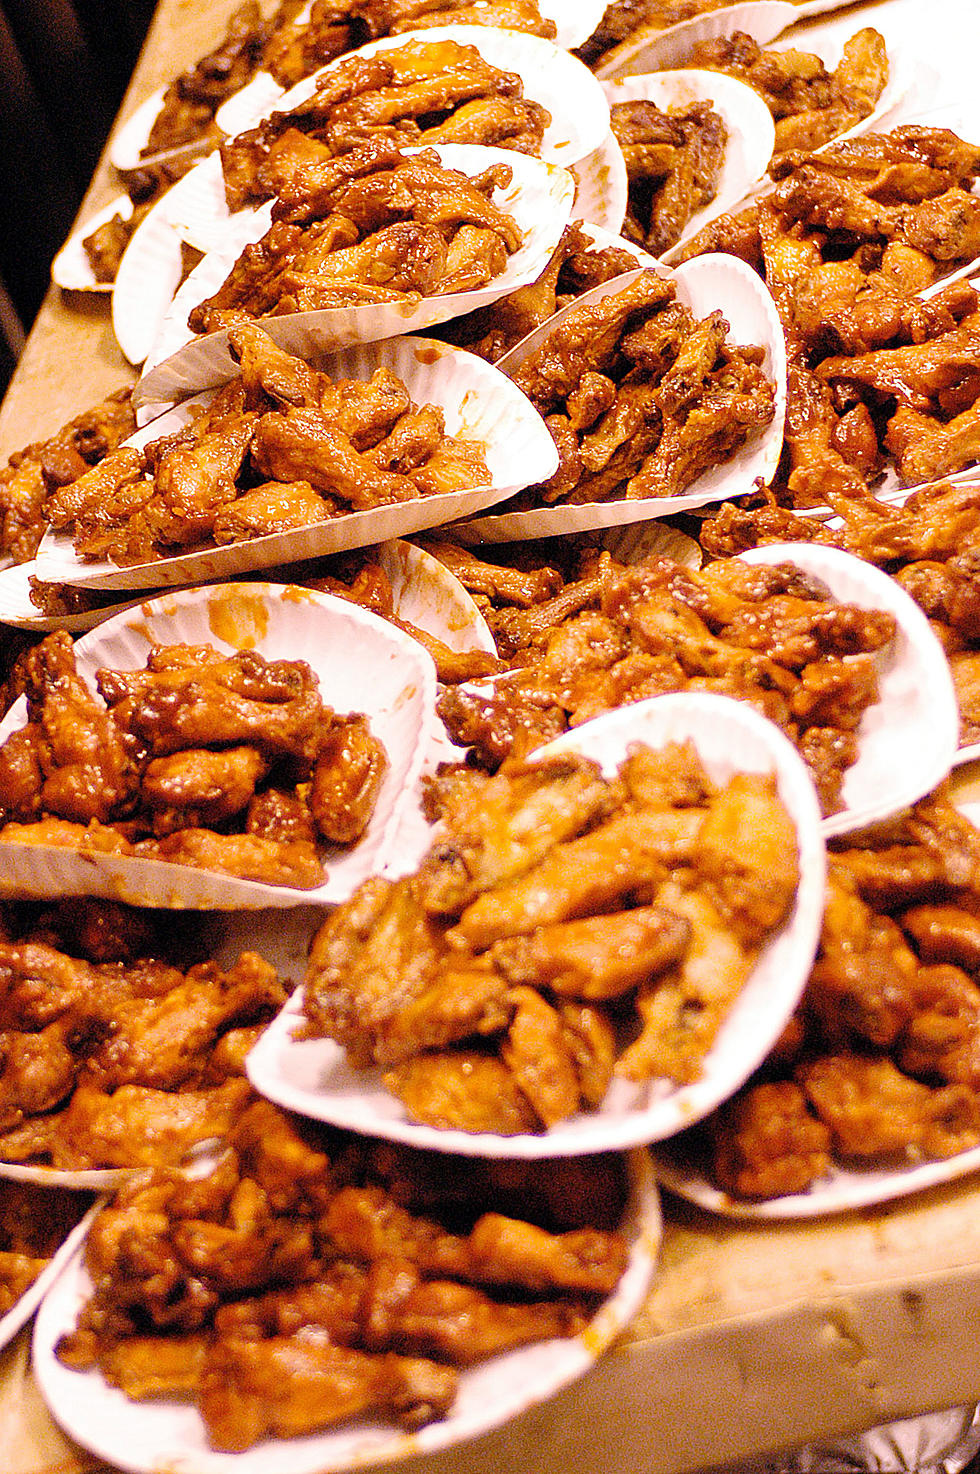 Chicken Wings Are Disappearing In Michigan Restaurants